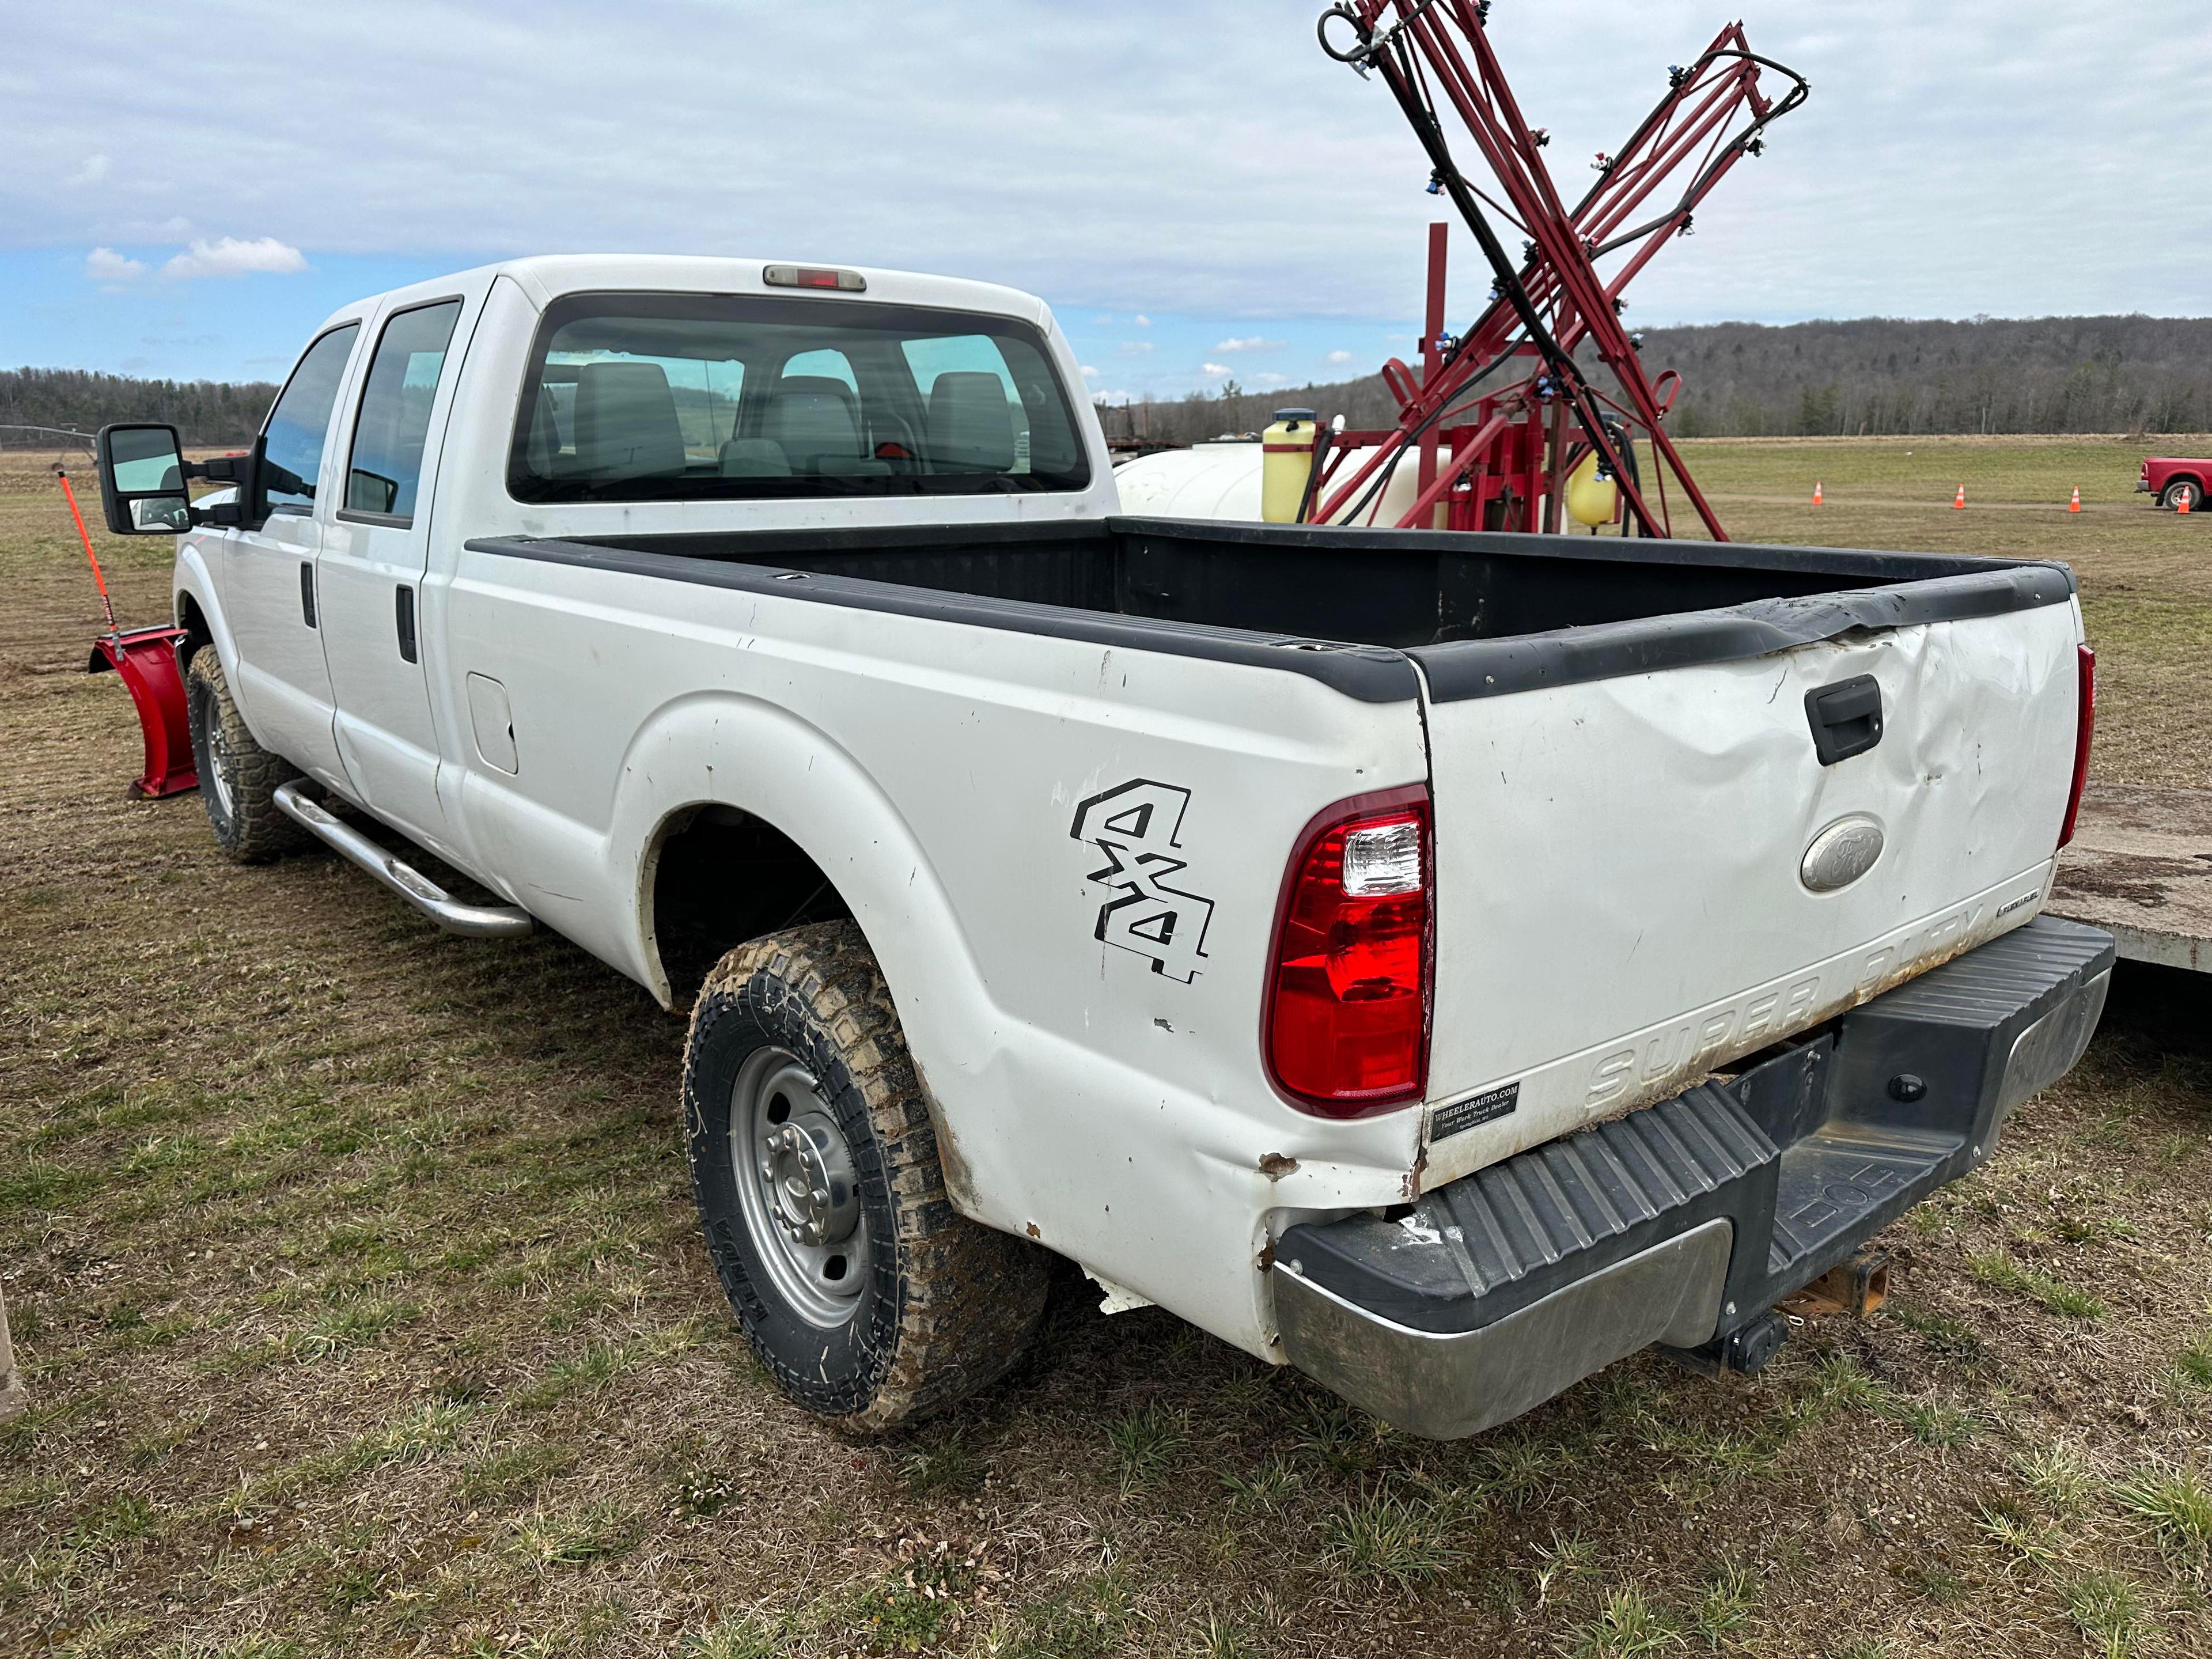 2012 Ford F-250 Super Duty 4X4 Crew Cab Long Bed Pickup